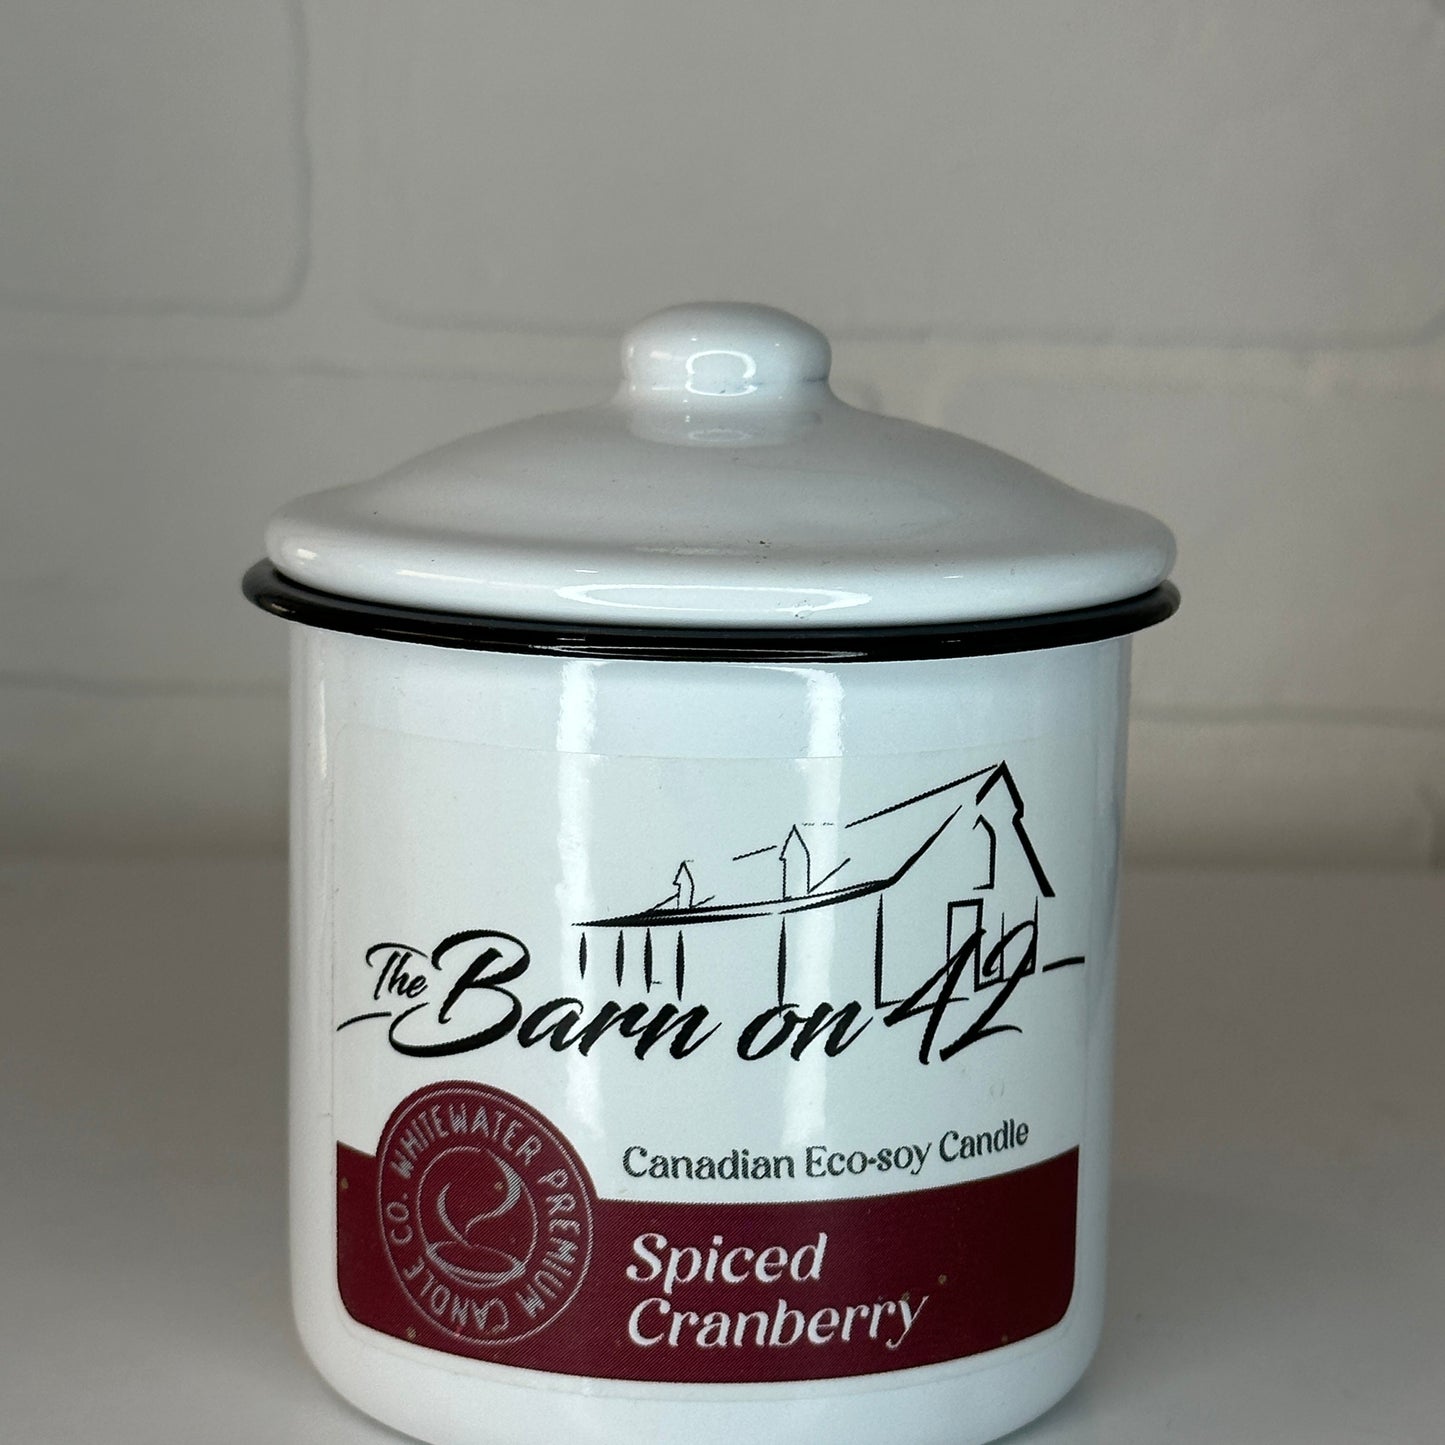 Spiced Cranberry 9 oz Eco-Soy Candle Whitewater Candles